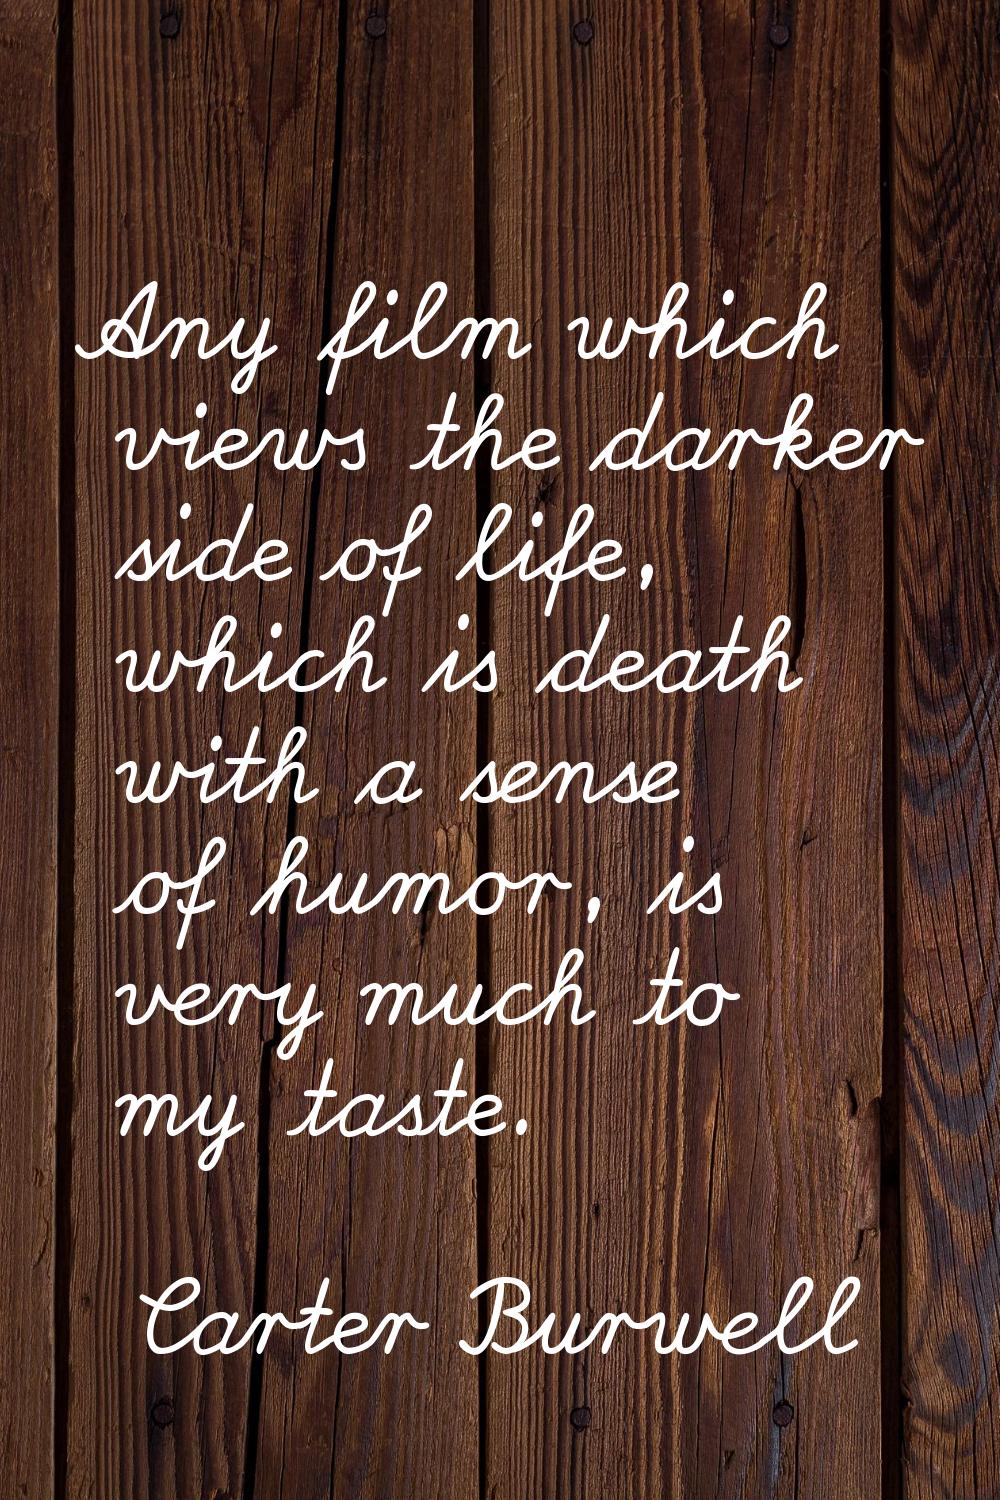 Any film which views the darker side of life, which is death with a sense of humor, is very much to